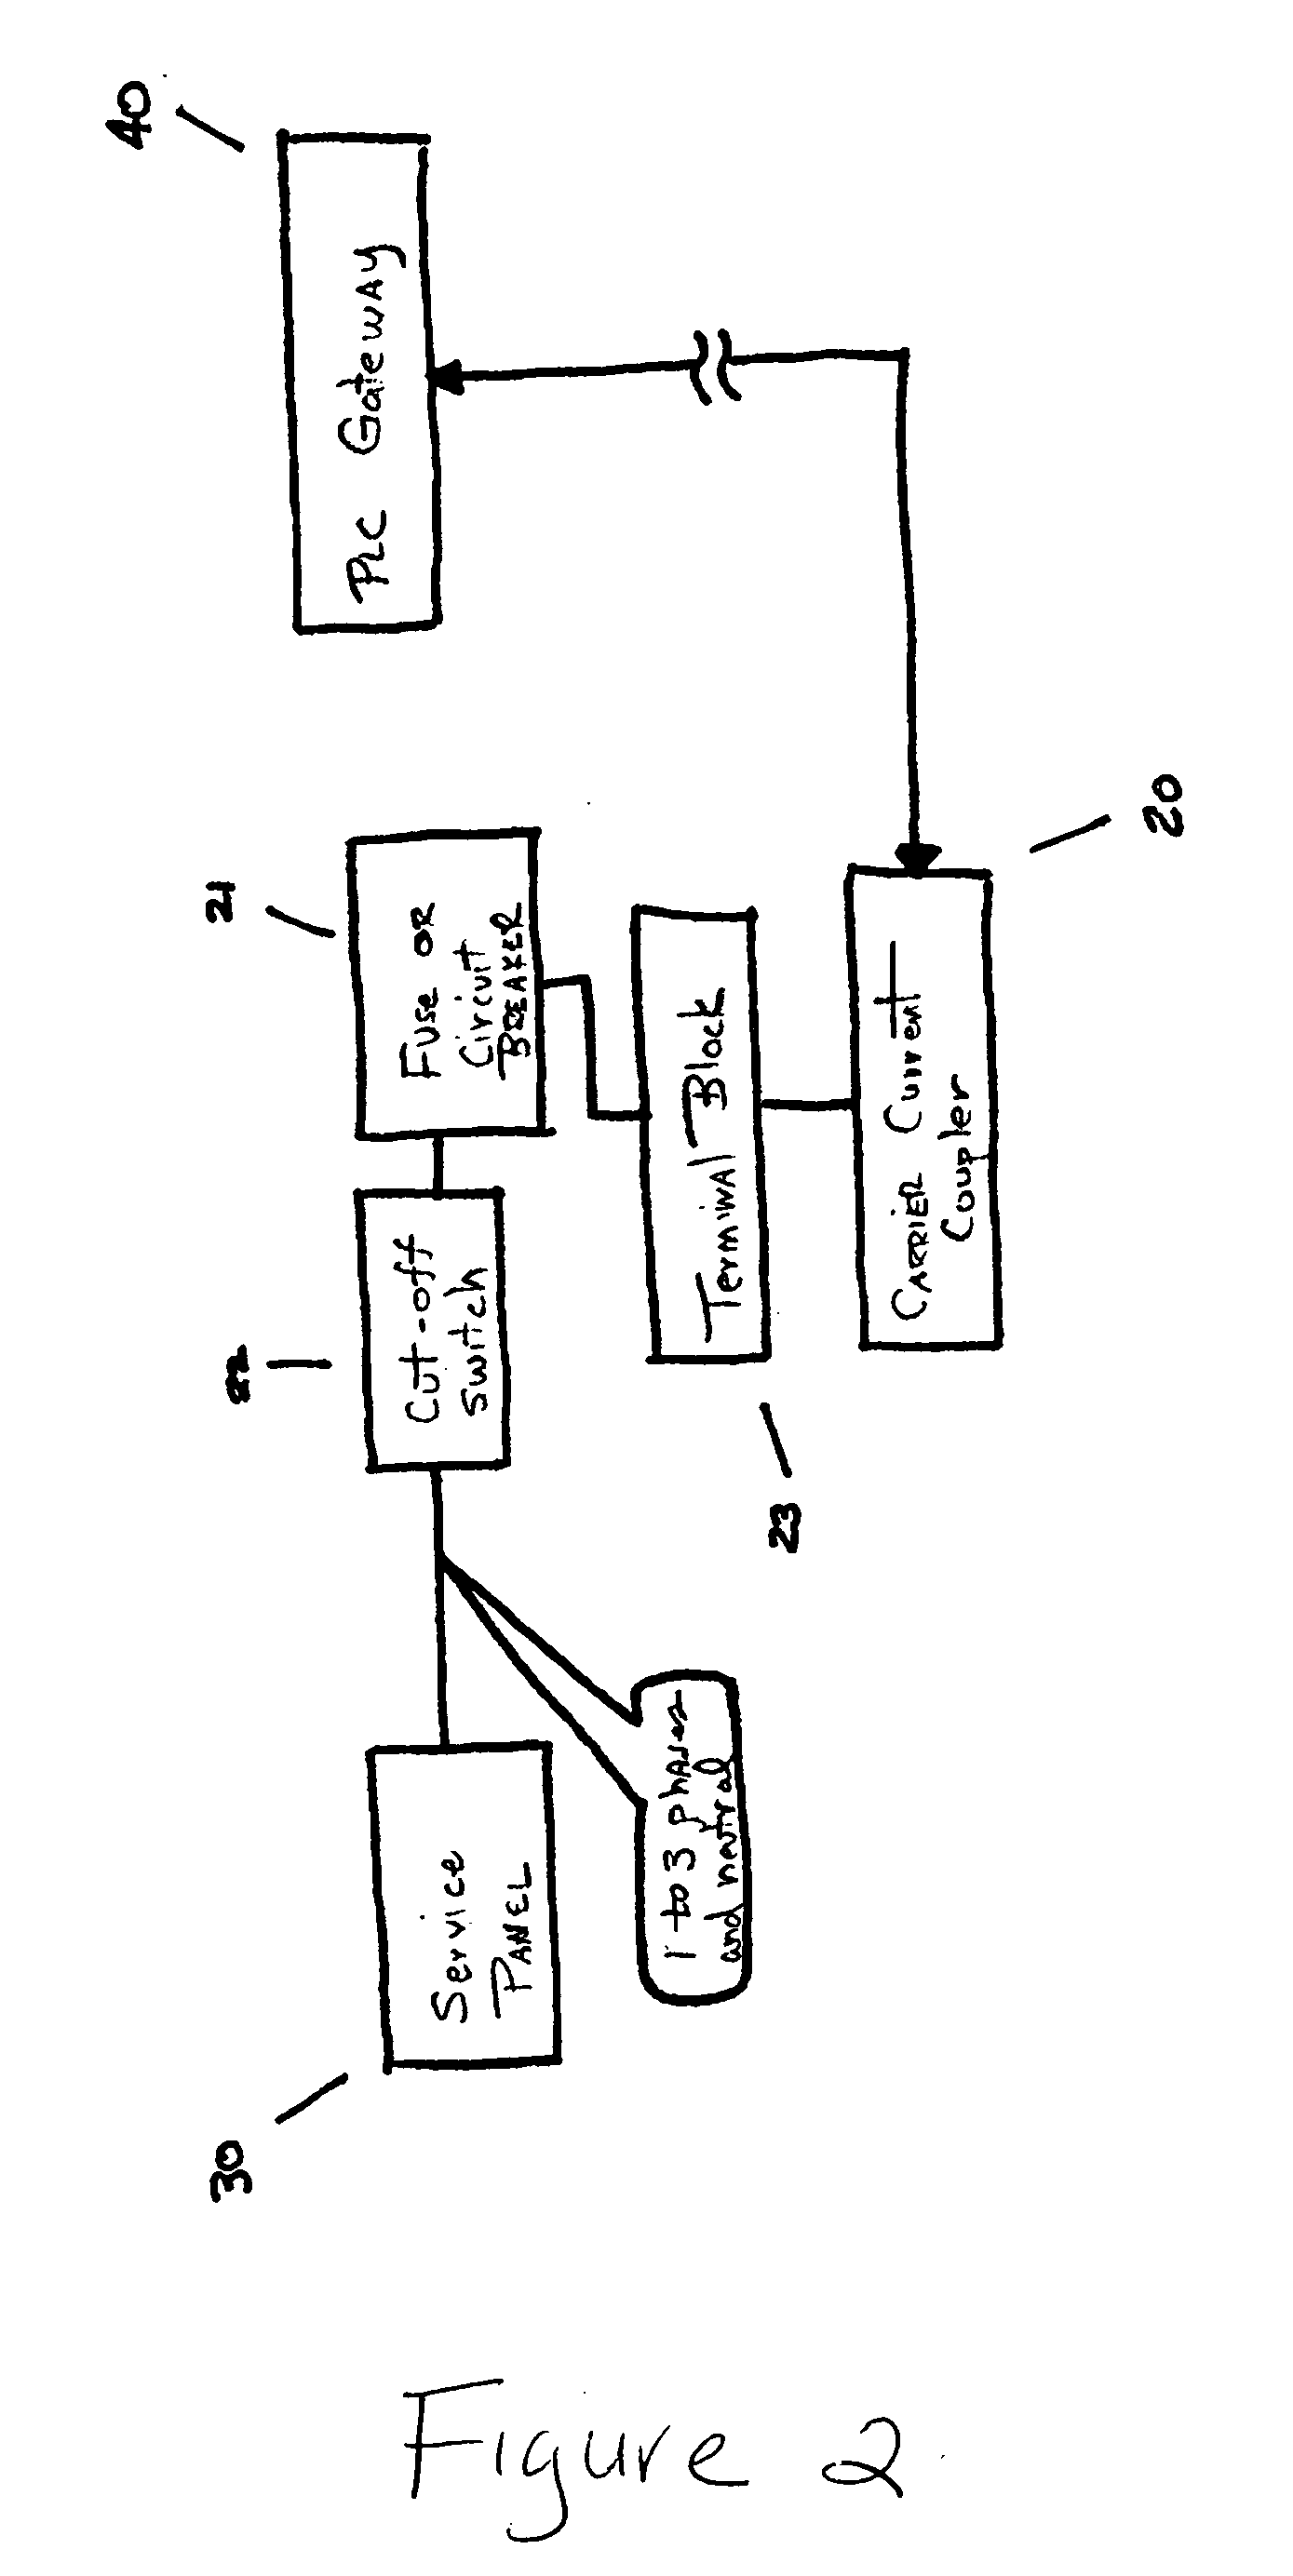 Method and apparatus for attaching power line communications to customer premises